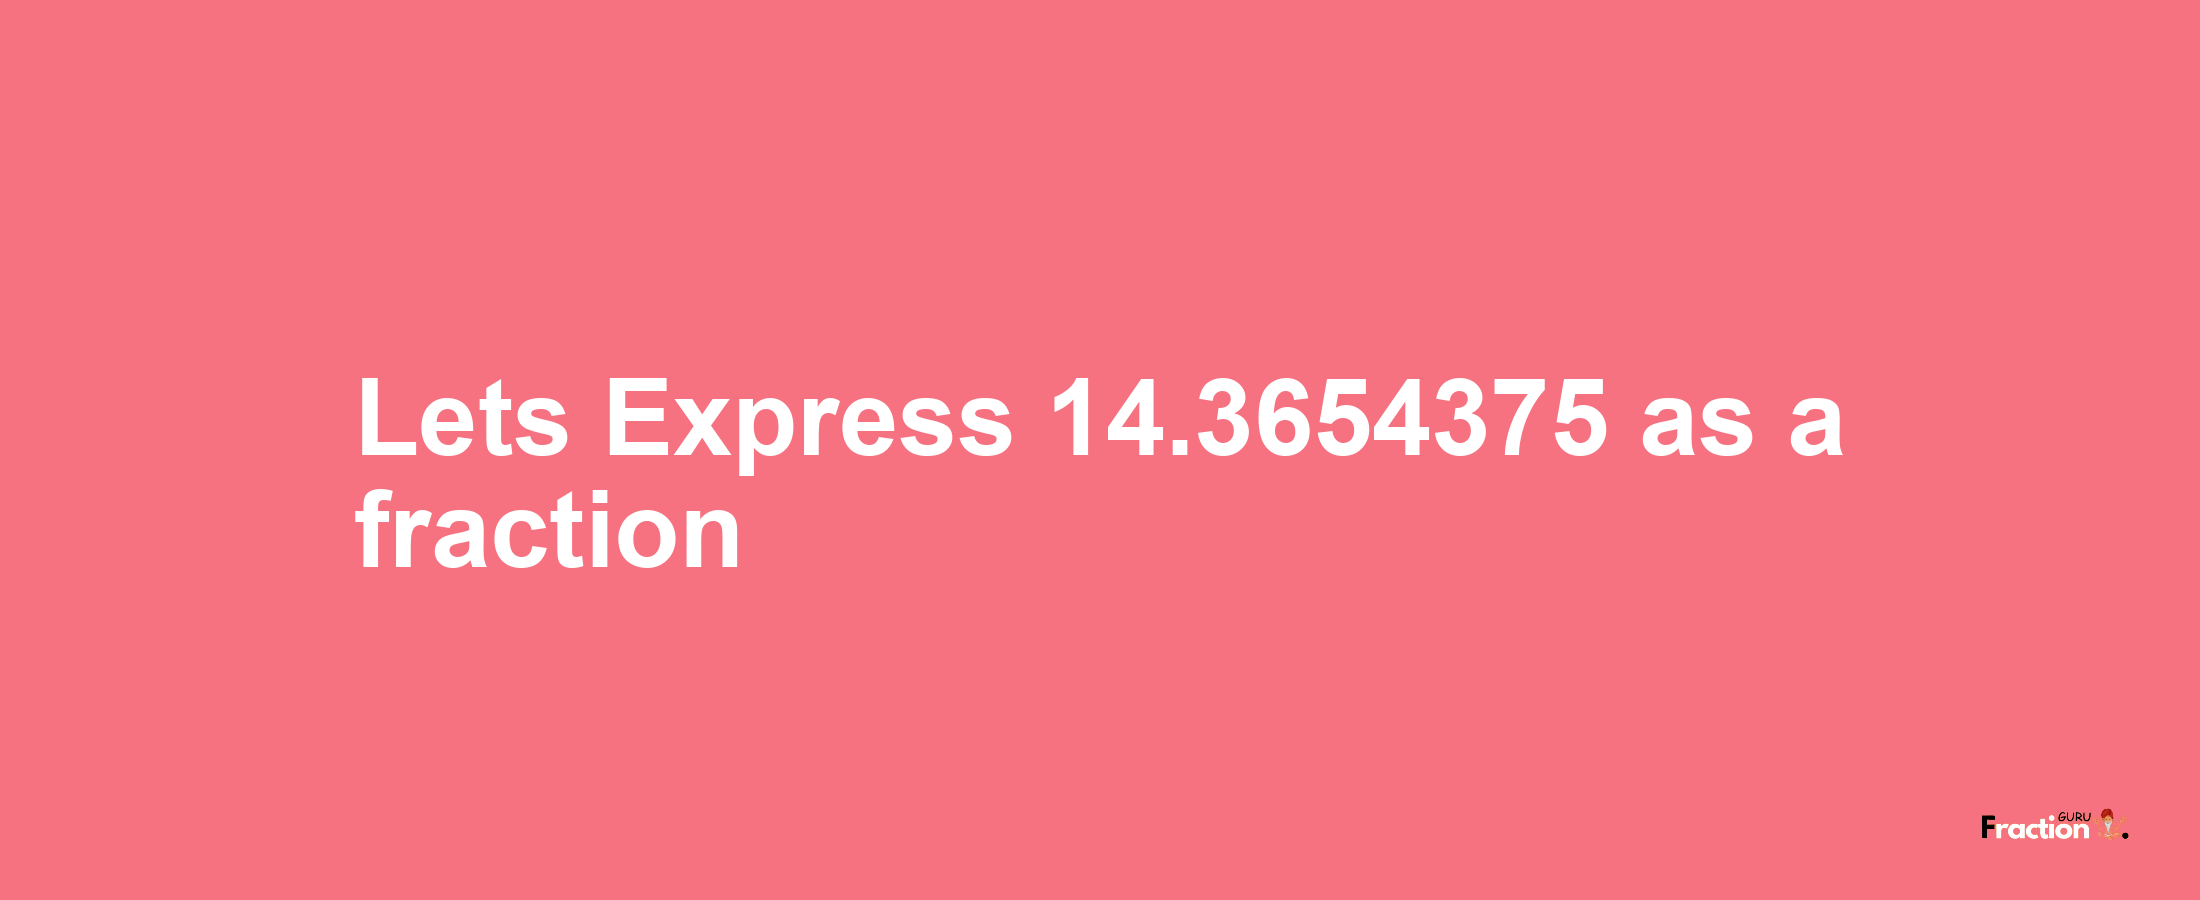 Lets Express 14.3654375 as afraction